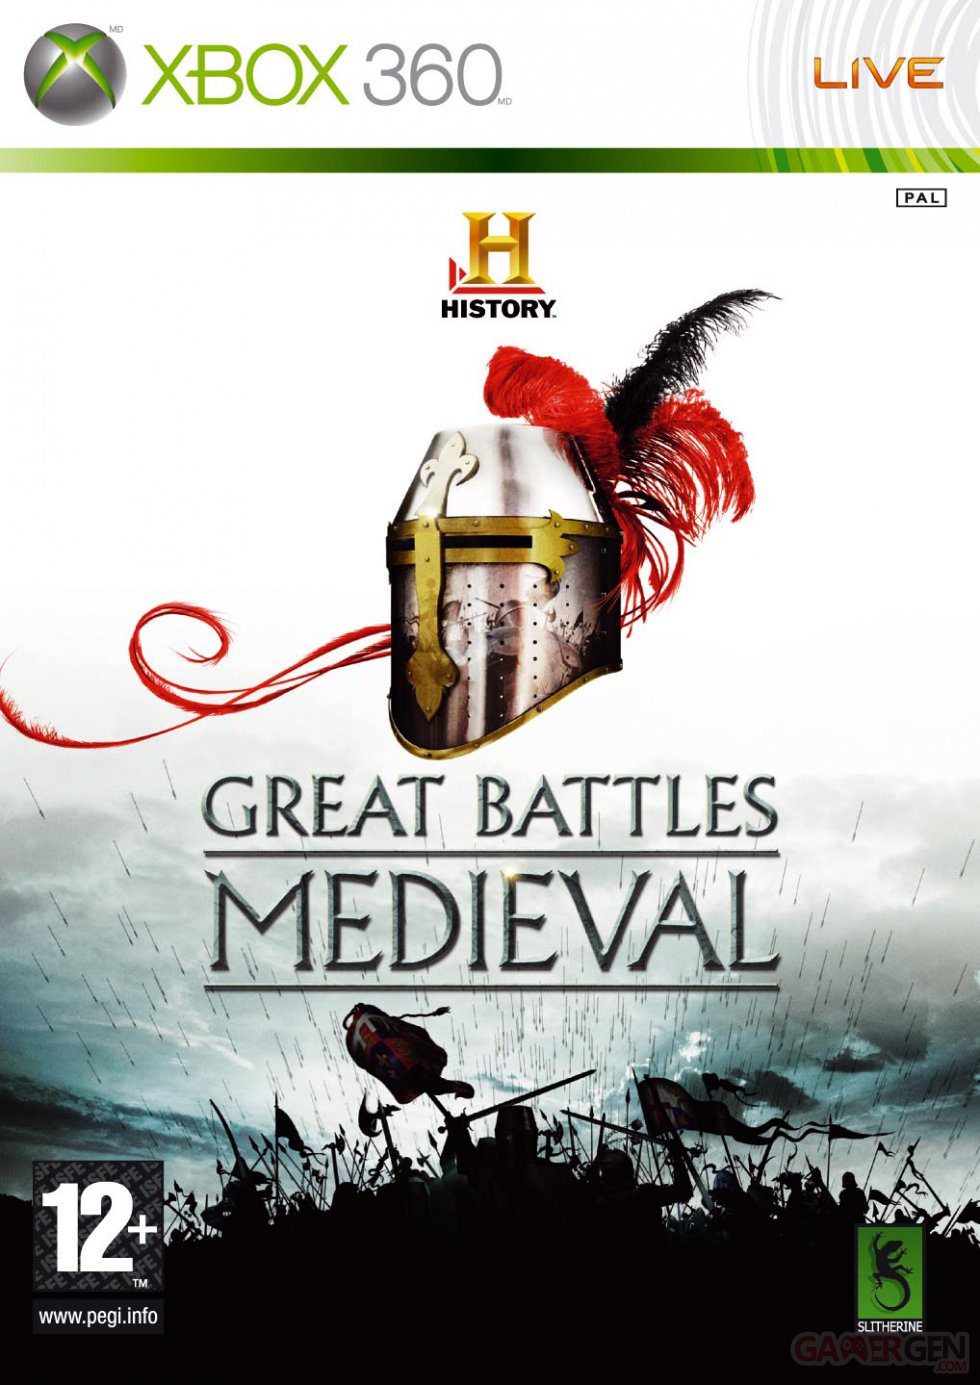 HISTORY GREAT BATTLES MEDIEVAL